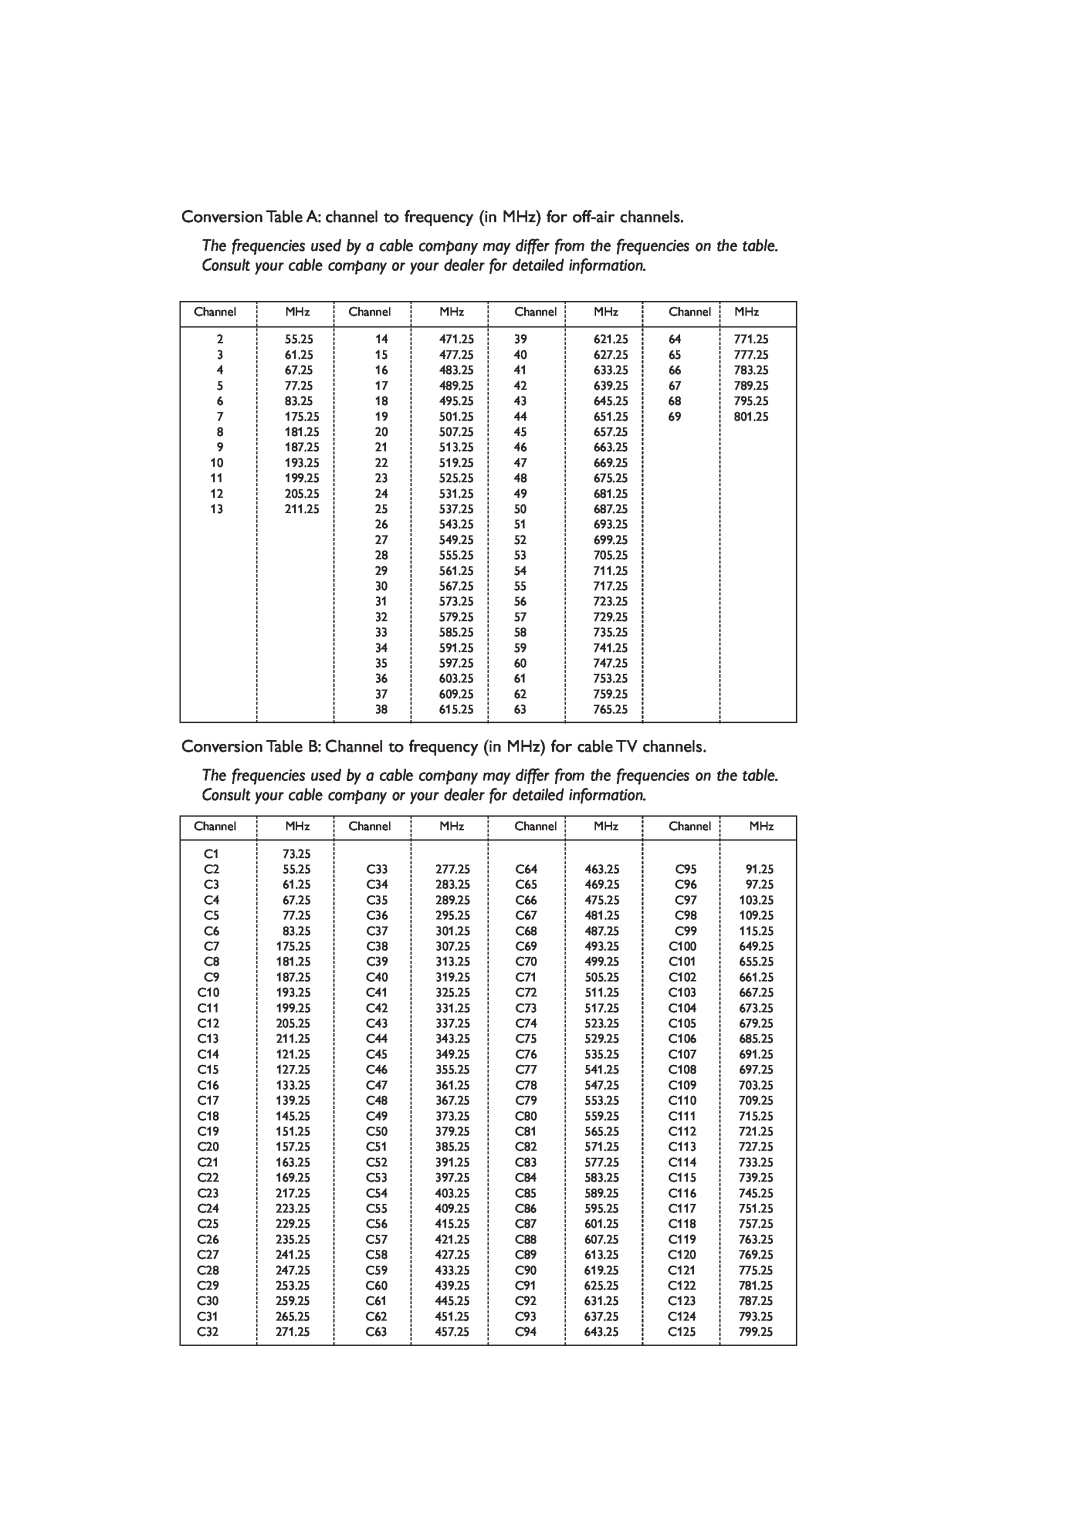 Technicolor - Thomson 15 manual Conversion Table A channel to frequency in MHz for off-air channels 